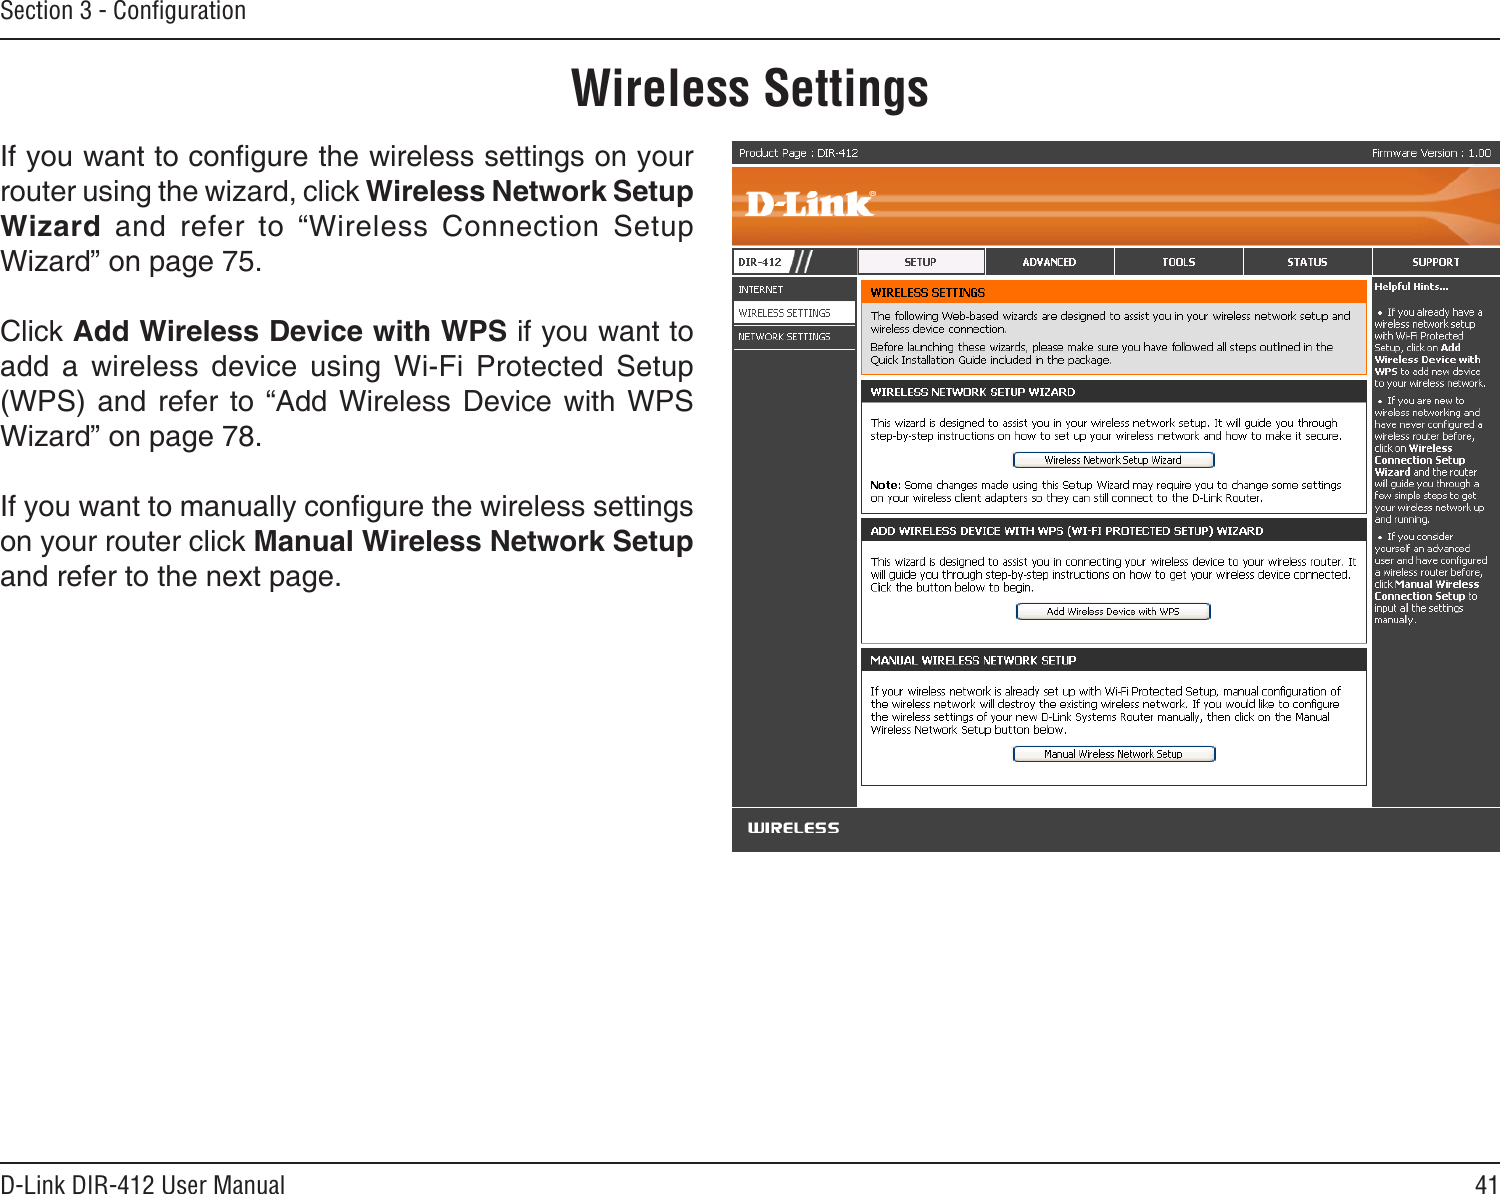 41D-Link DIR-412 User ManualSection 3 - ConﬁgurationWireless SettingsIf you want to congure the wireless settings on your router using the wizard, click Wireless Network Setup Wizard  and  refer  to  “Wireless  Connection  Setup Wizard” on page 75.Click Add Wireless Device with WPS if you want to add  a  wireless  device  using  Wi-Fi  Protected  Setup (WPS)  and  refer  to  “Add  Wireless  Device  with  WPS Wizard” on page 78.If you want to manually congure the wireless settings on your router click Manual Wireless Network Setup and refer to the next page.